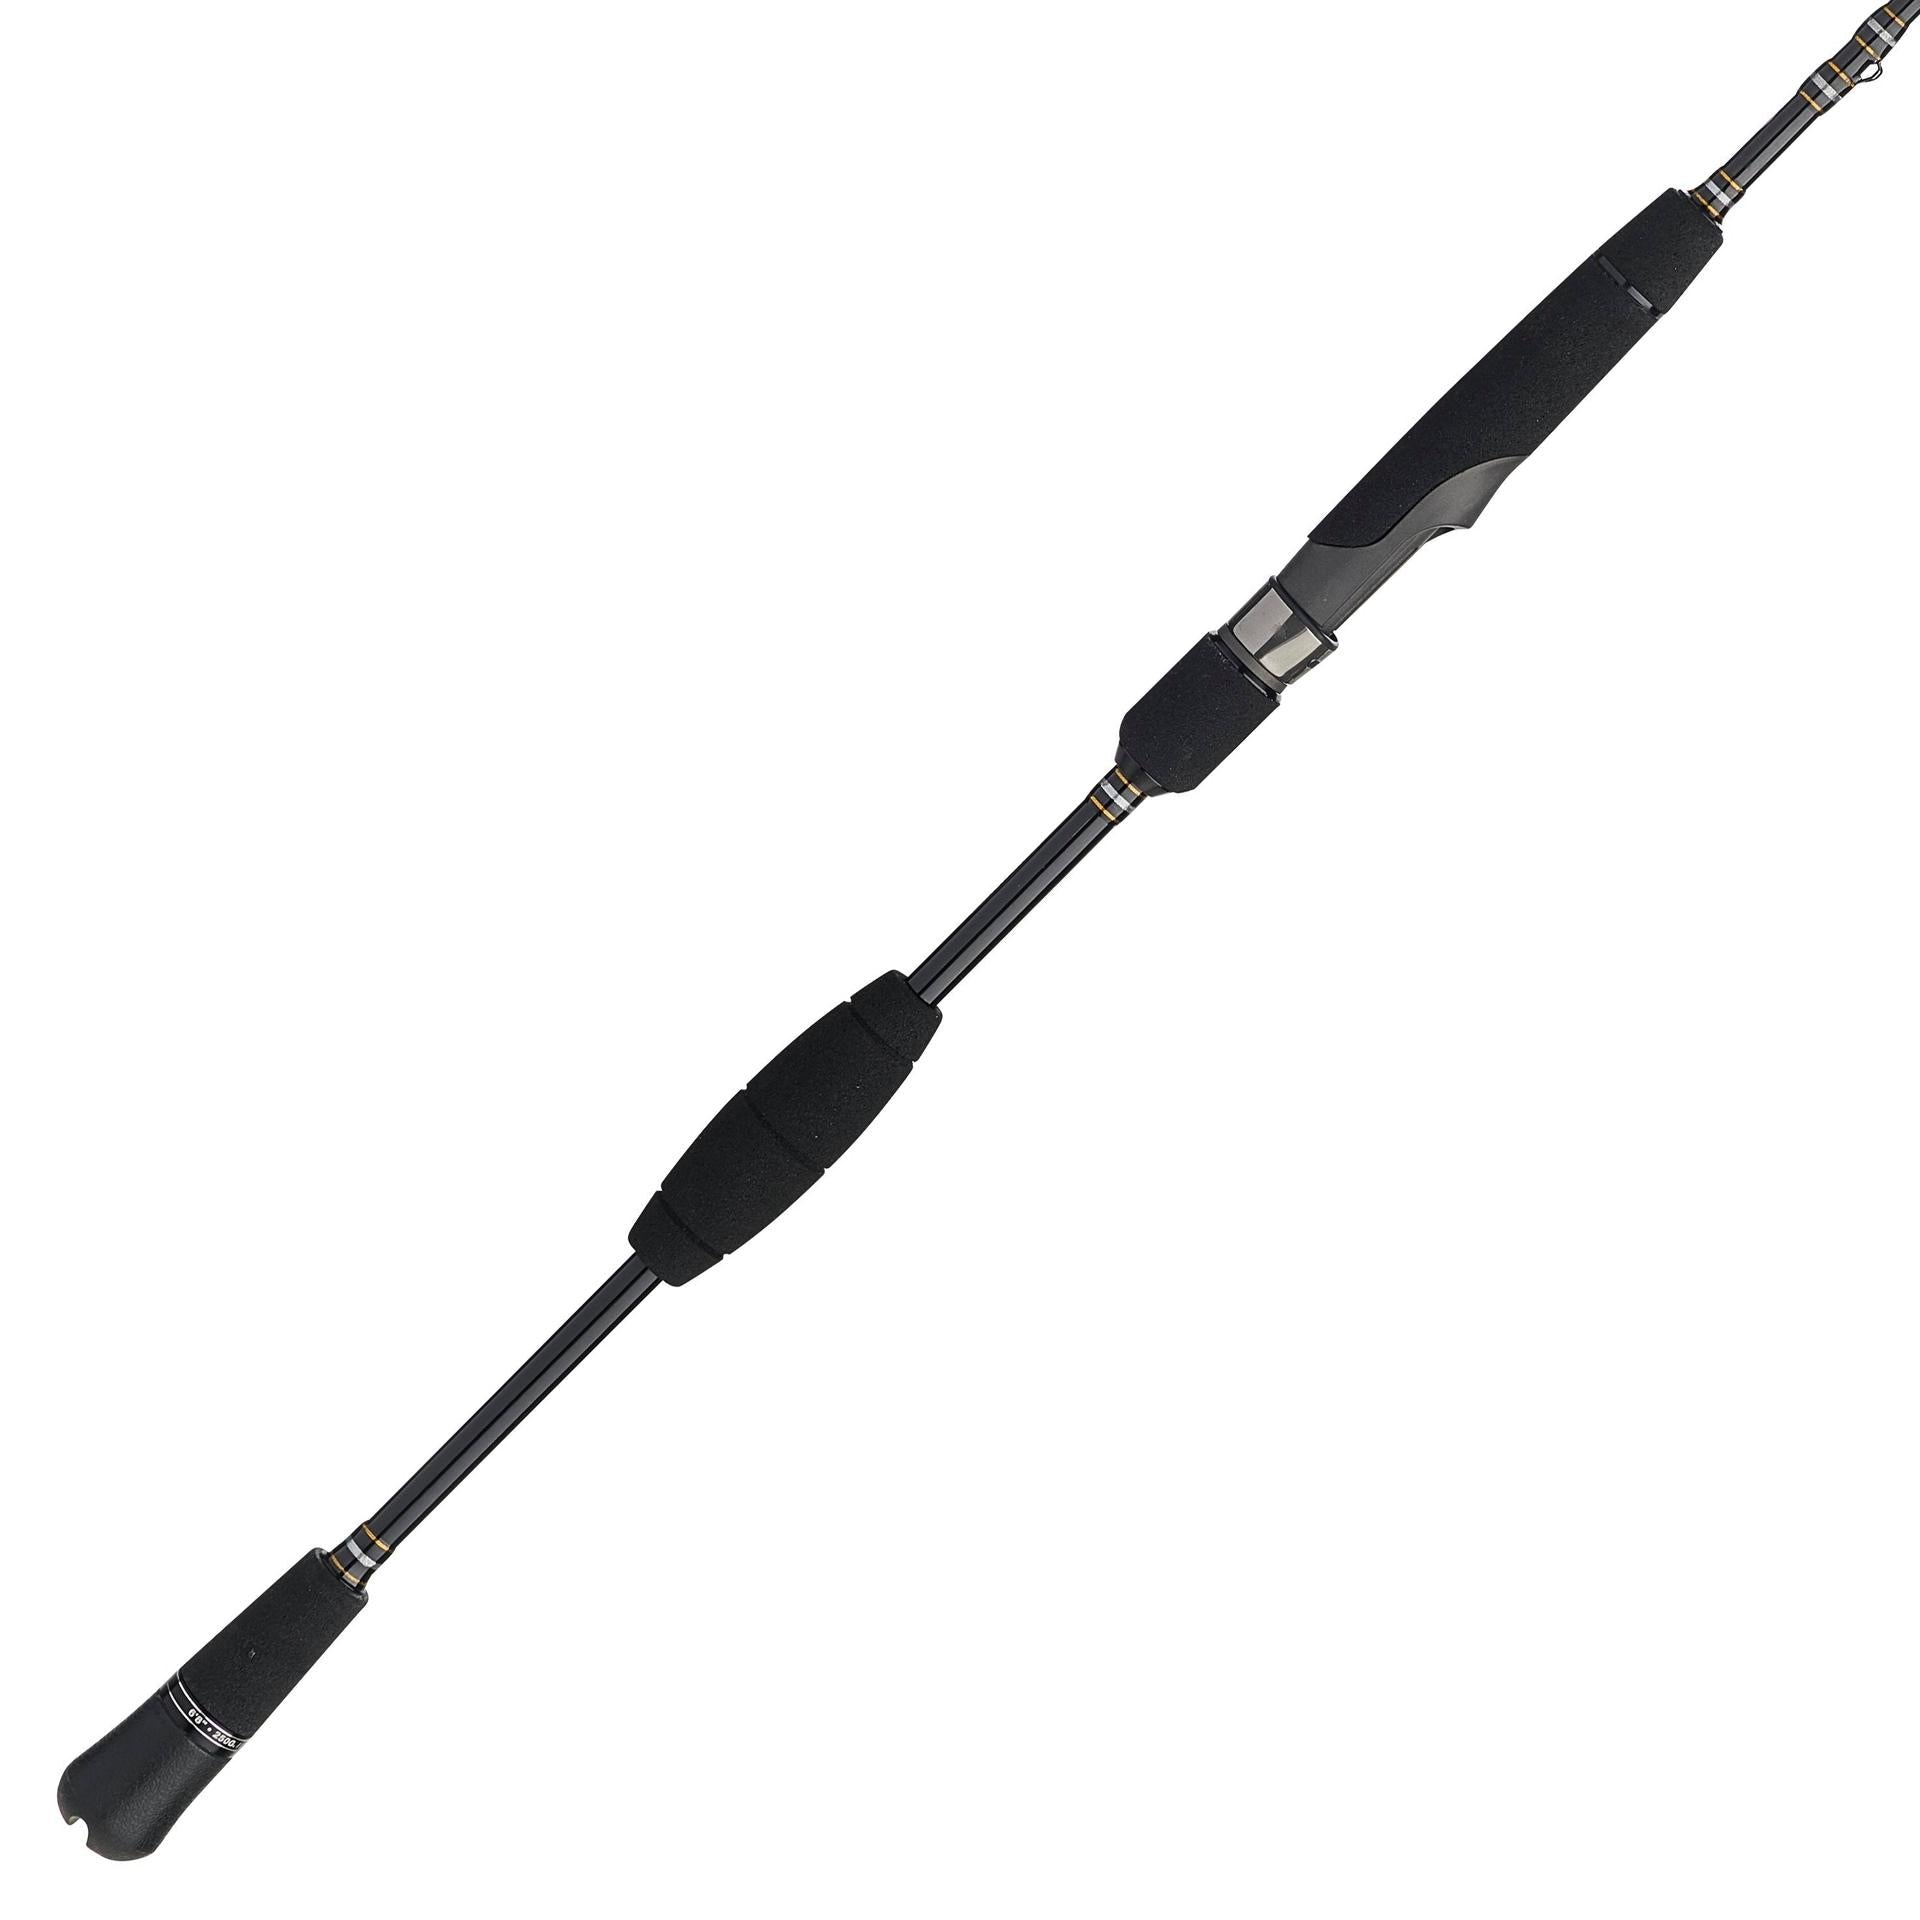 SABRE BY PENN 7 FOOT 12 TO 30 POUND RATED SPINNING FISHING ROD MADE IN USA  - Berinson Tackle Company